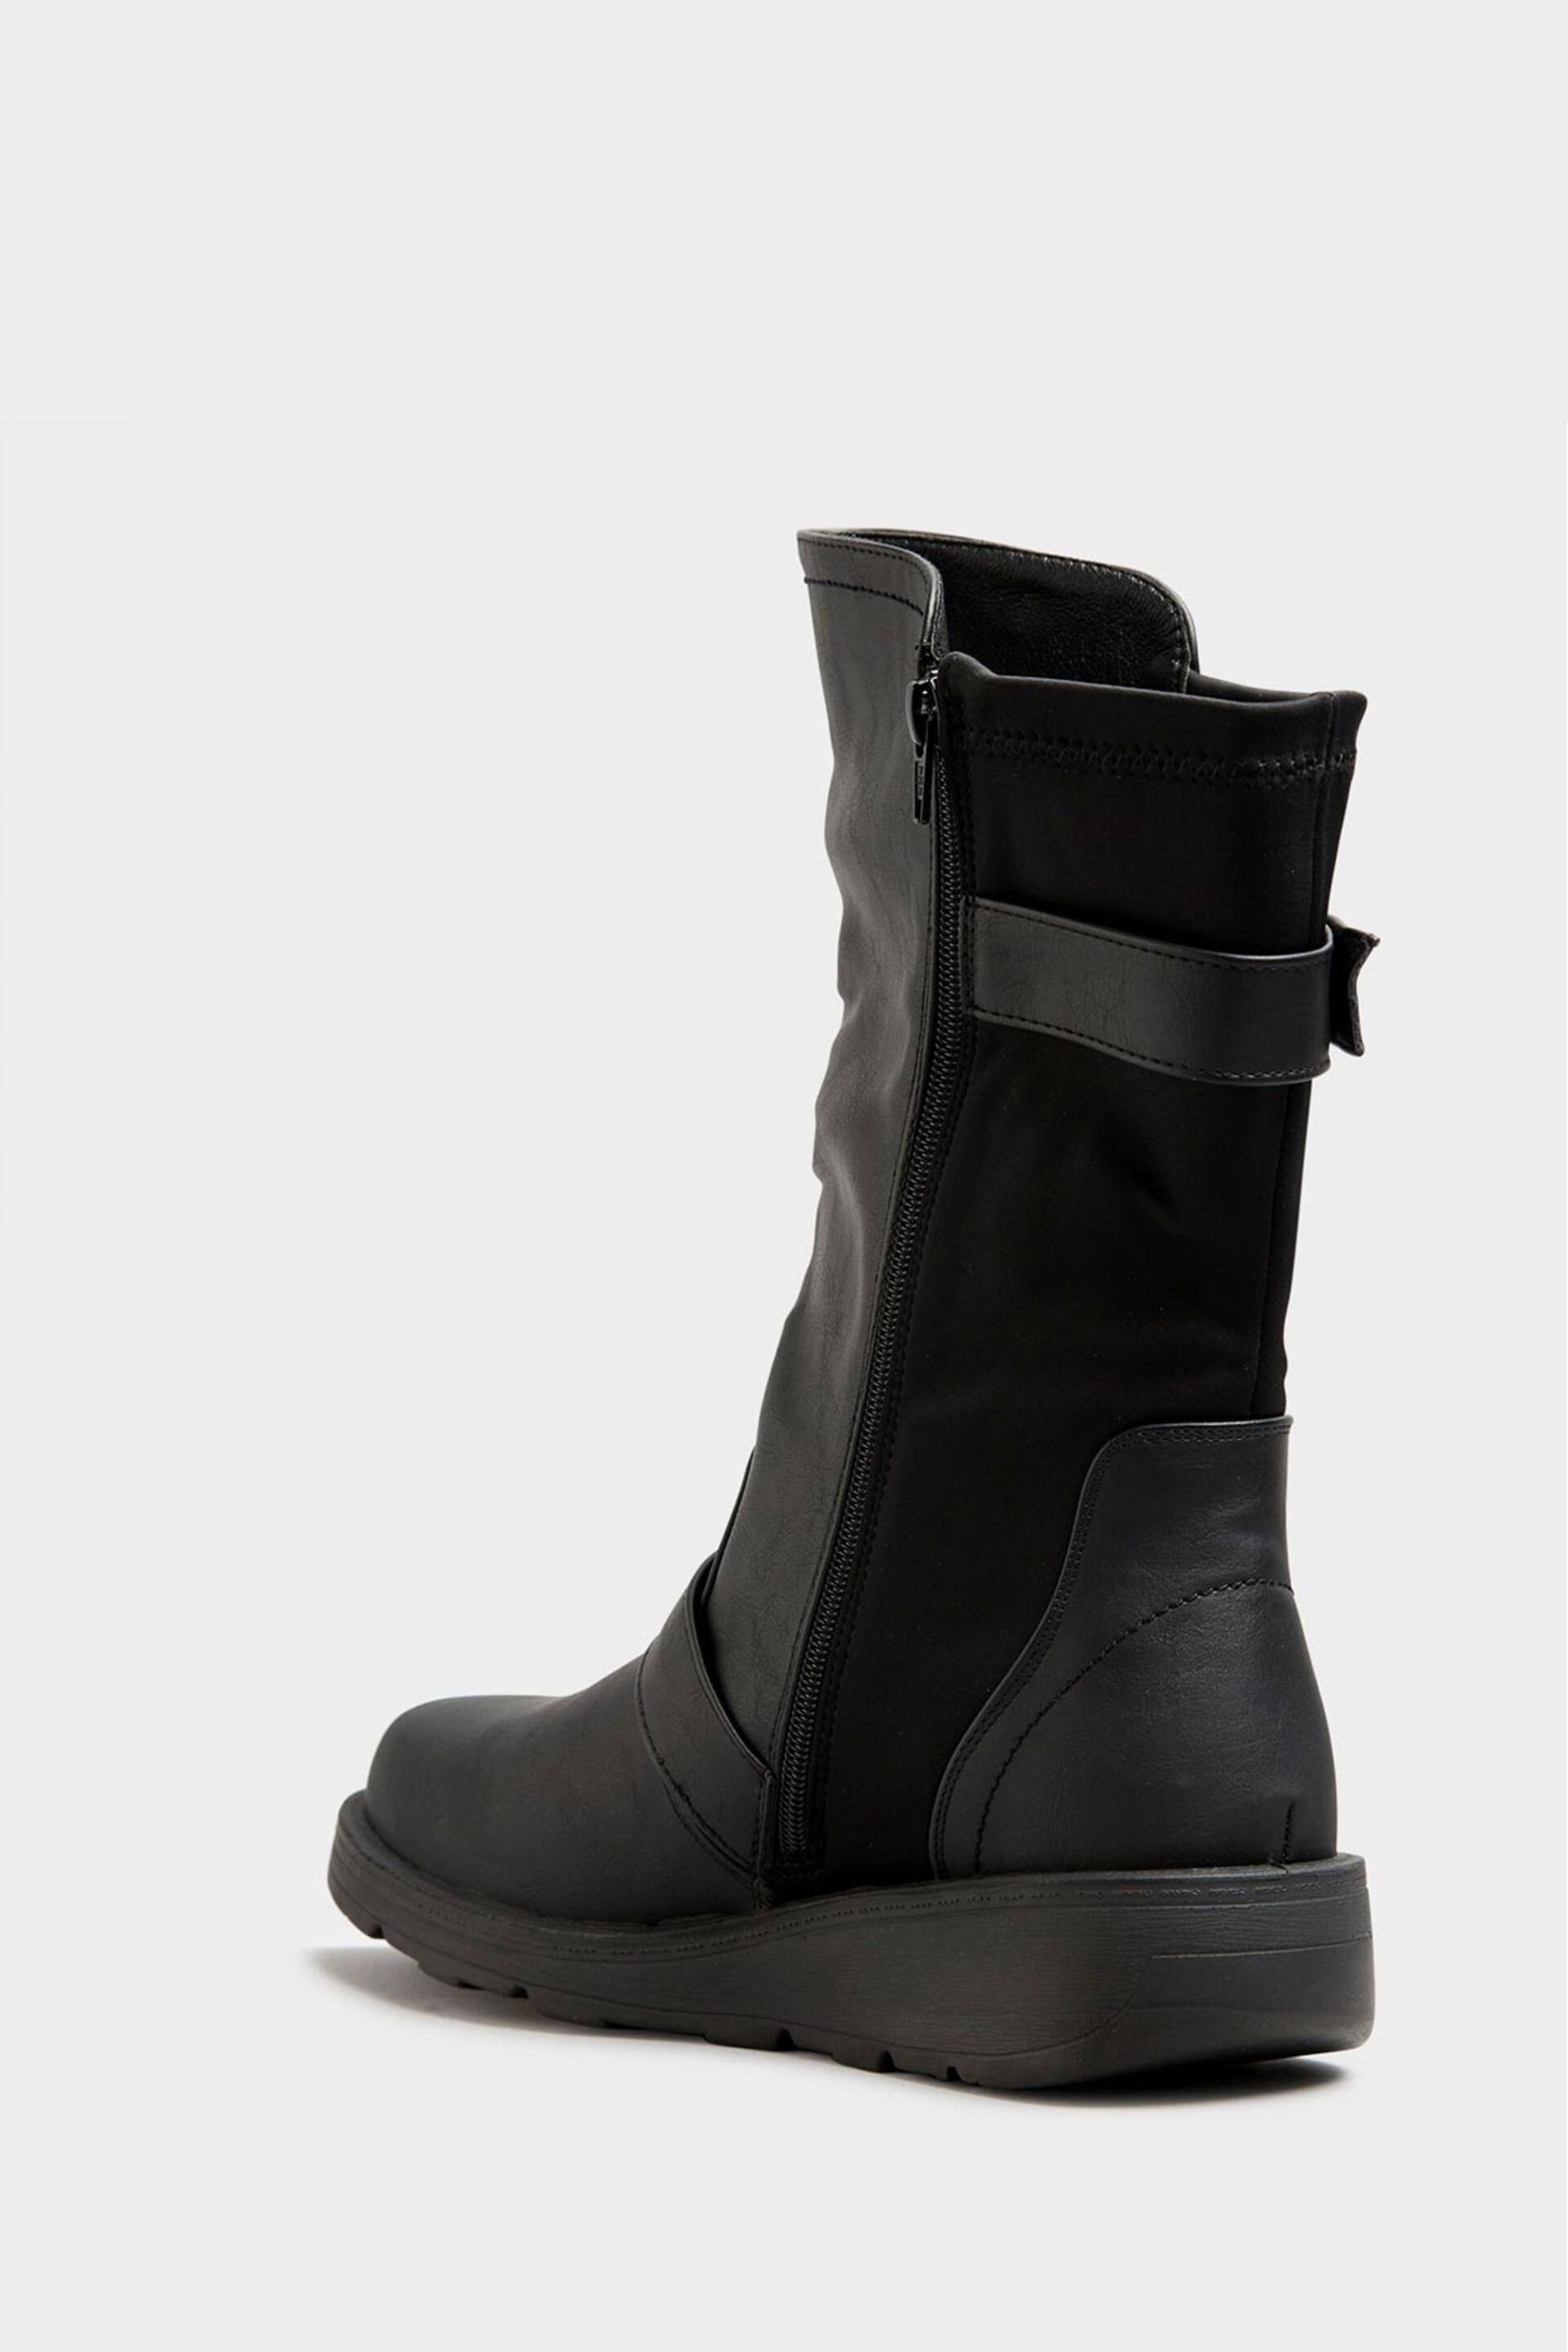 Yours Curve Black Wide Fit Low Wedge Buckle Boots - Image 3 of 5